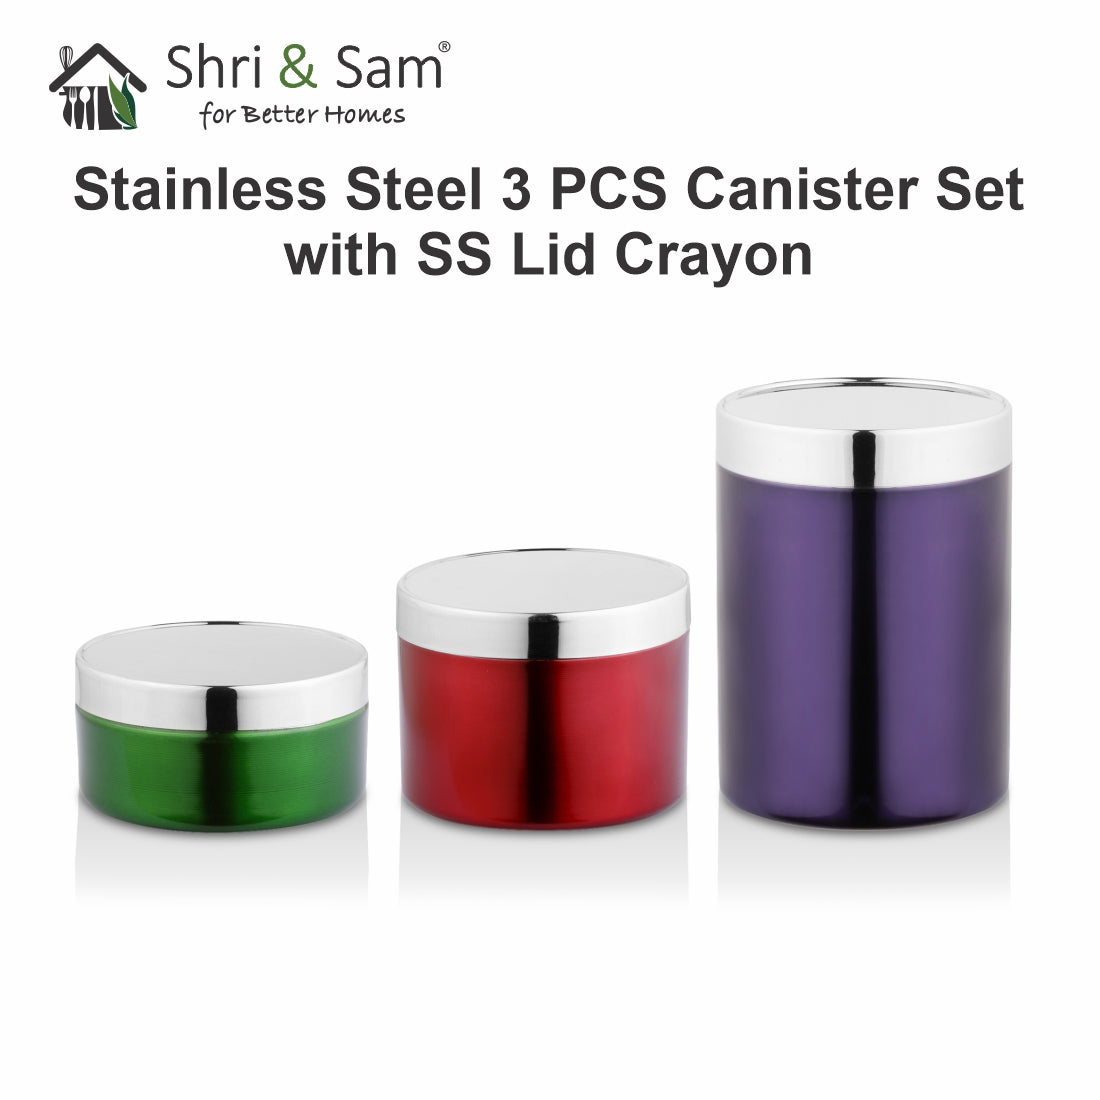 Stainless Steel 3 PCS Canister Set with SS Lid Crayon